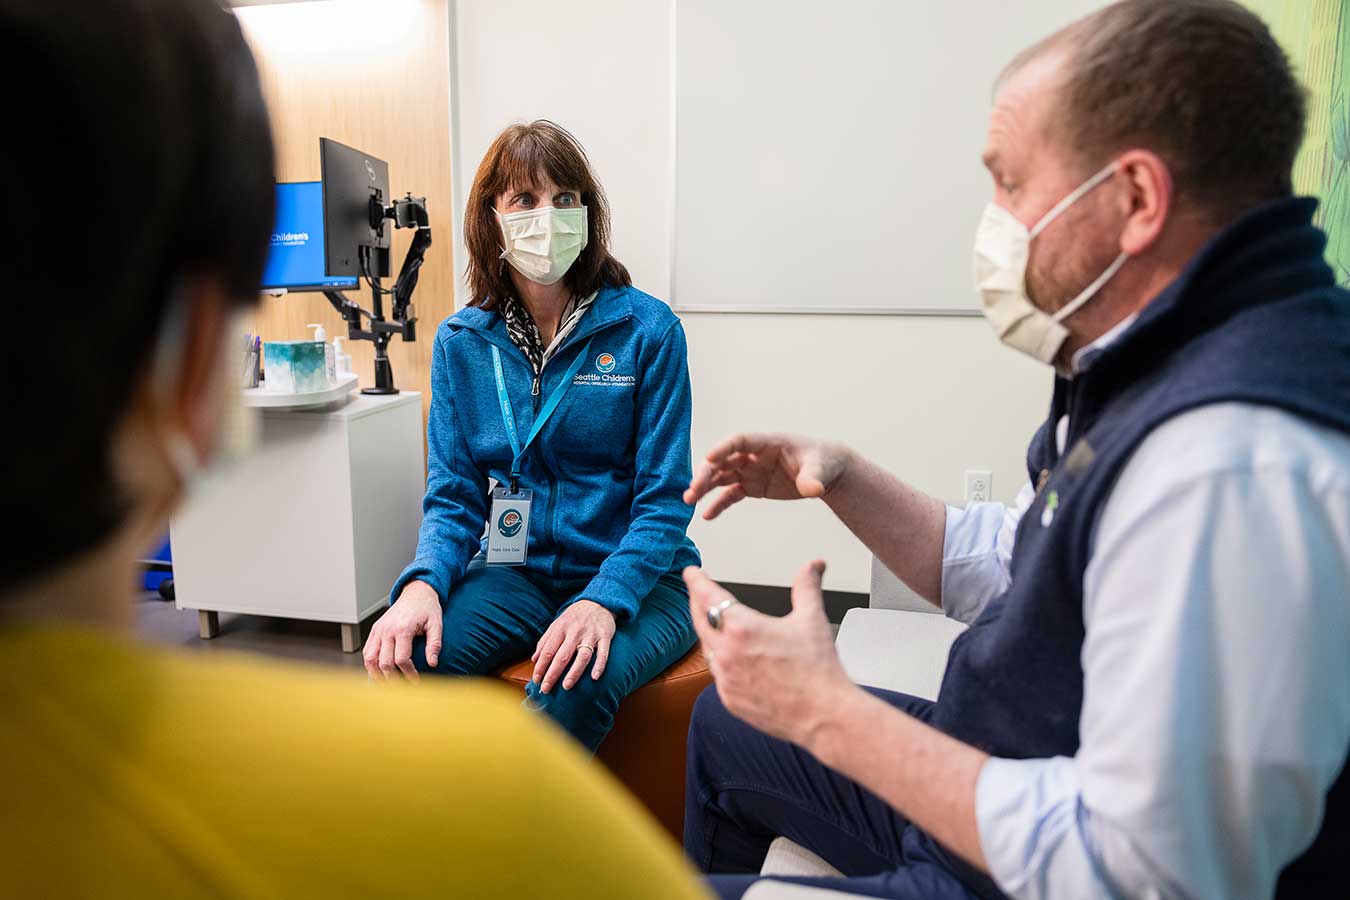 Providers in an exam room discuss a patient